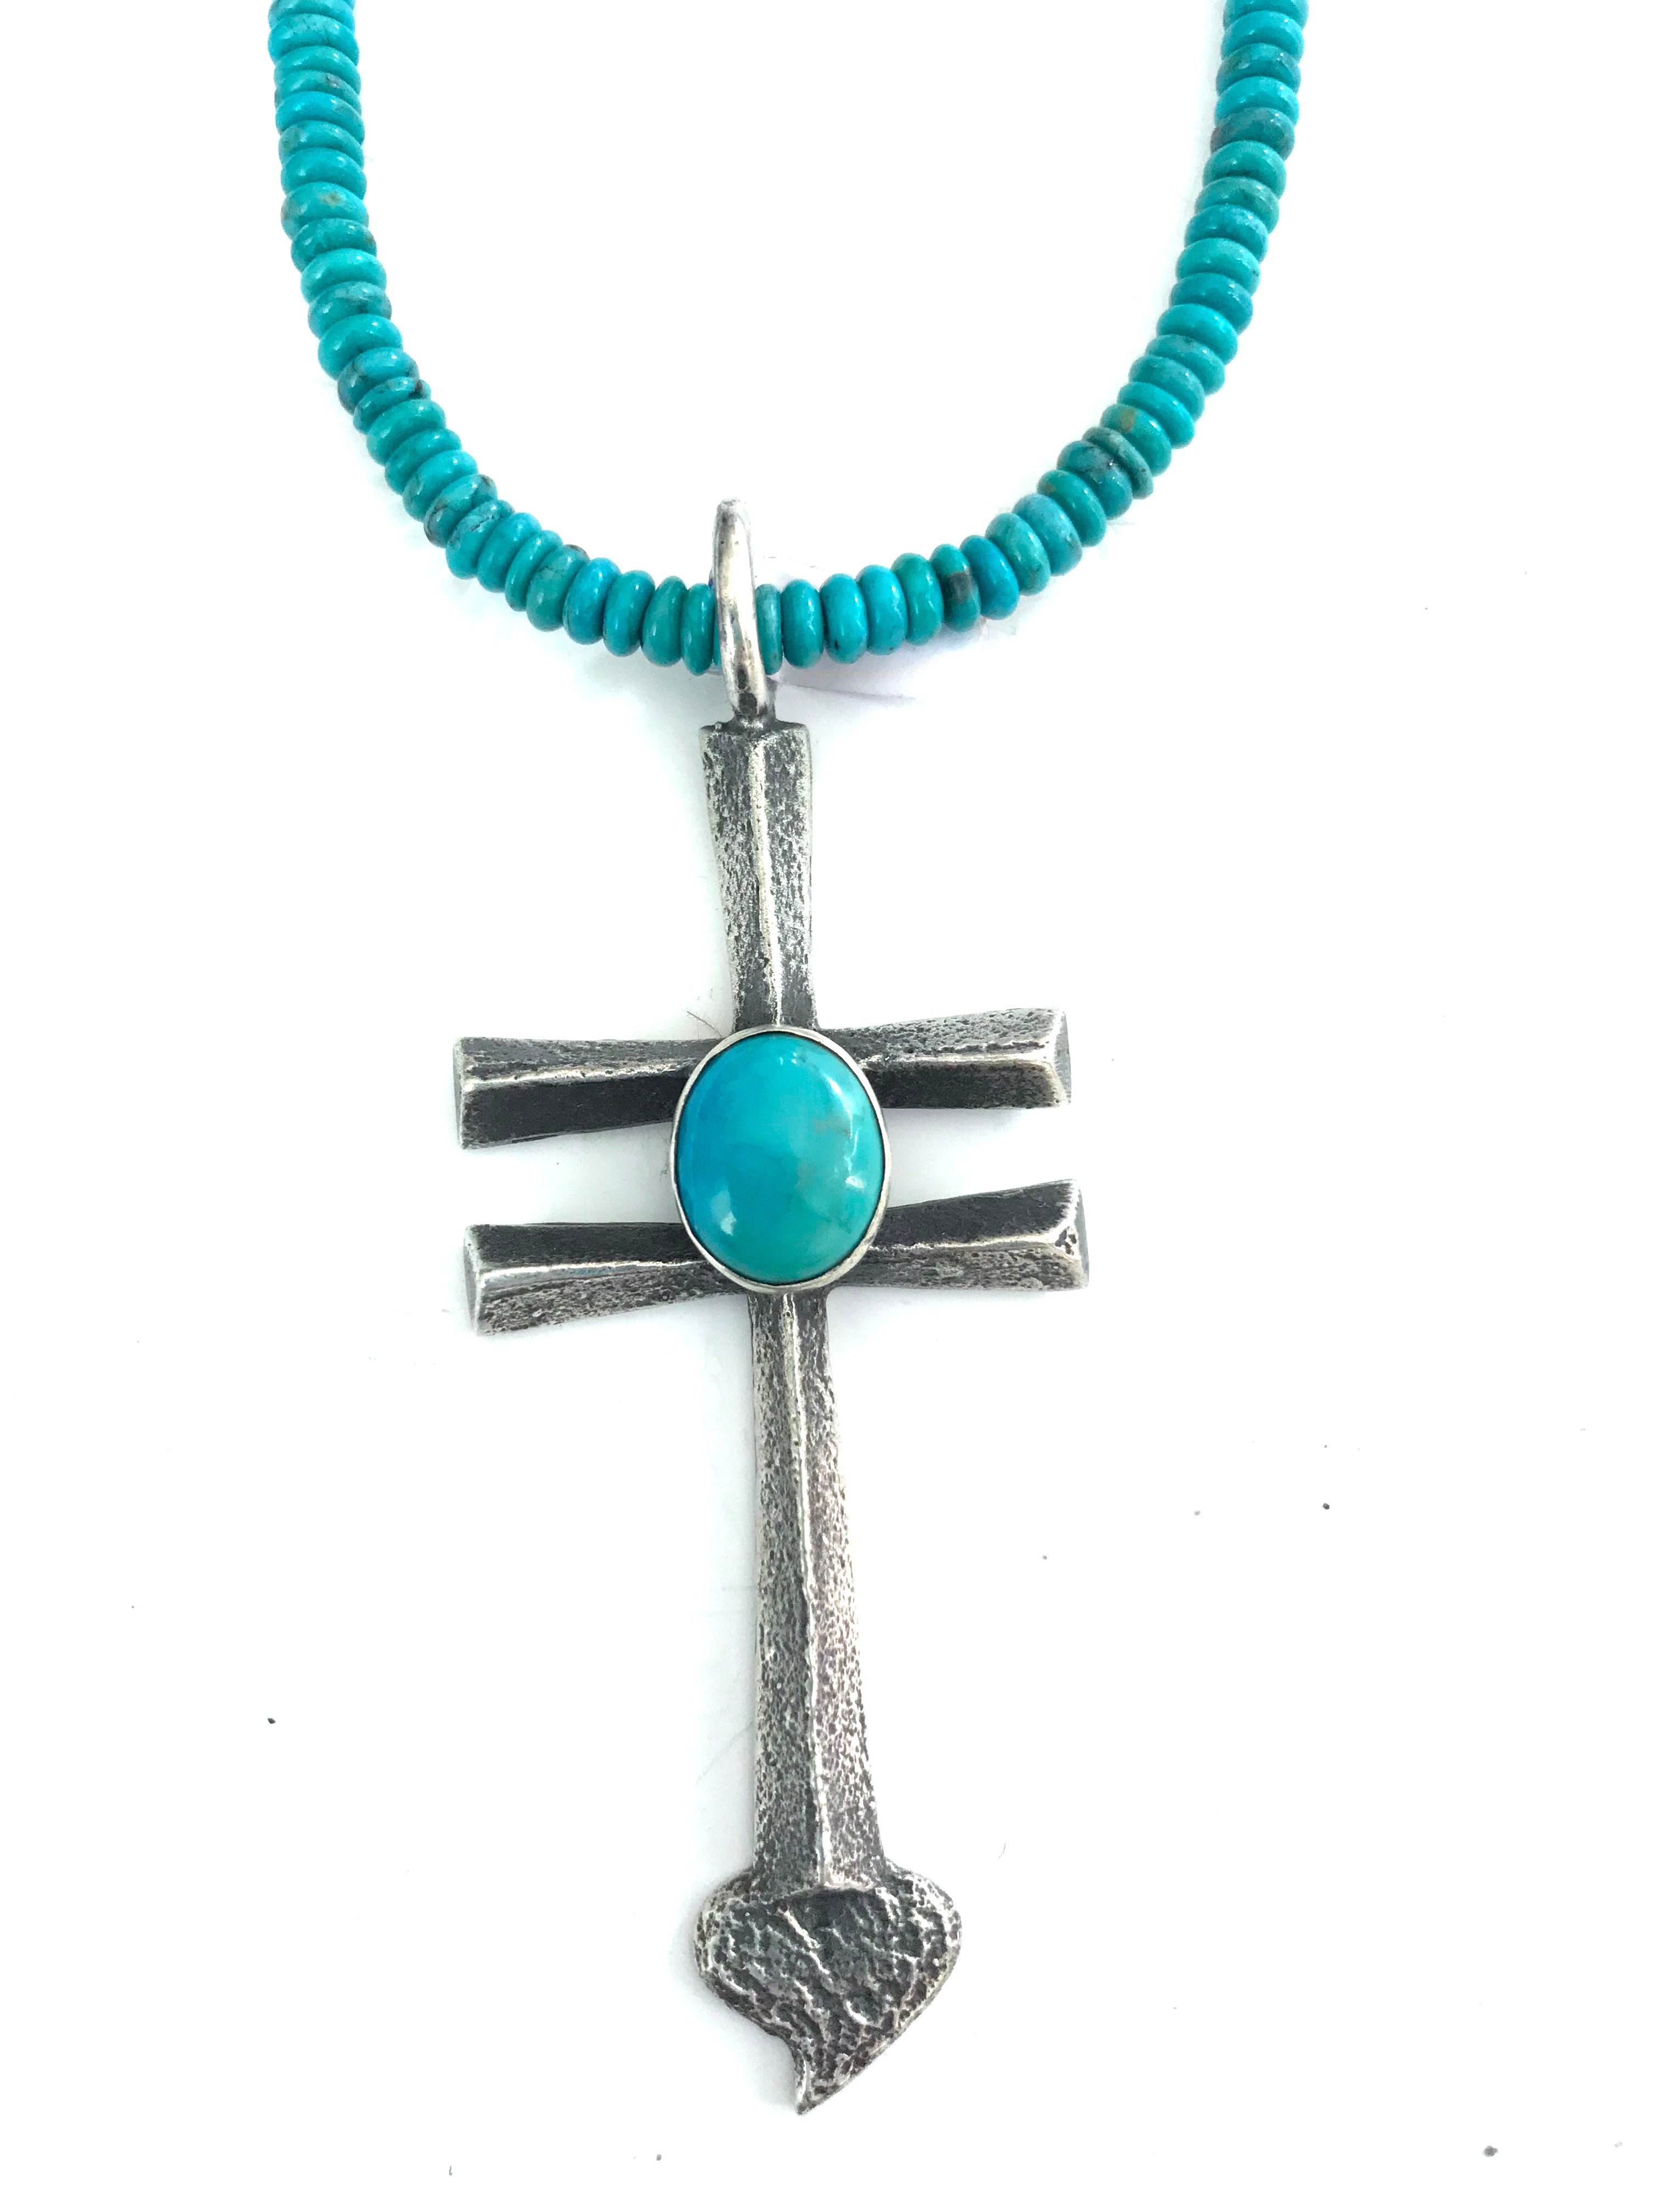 Unusual dragonfly/ cross pendent